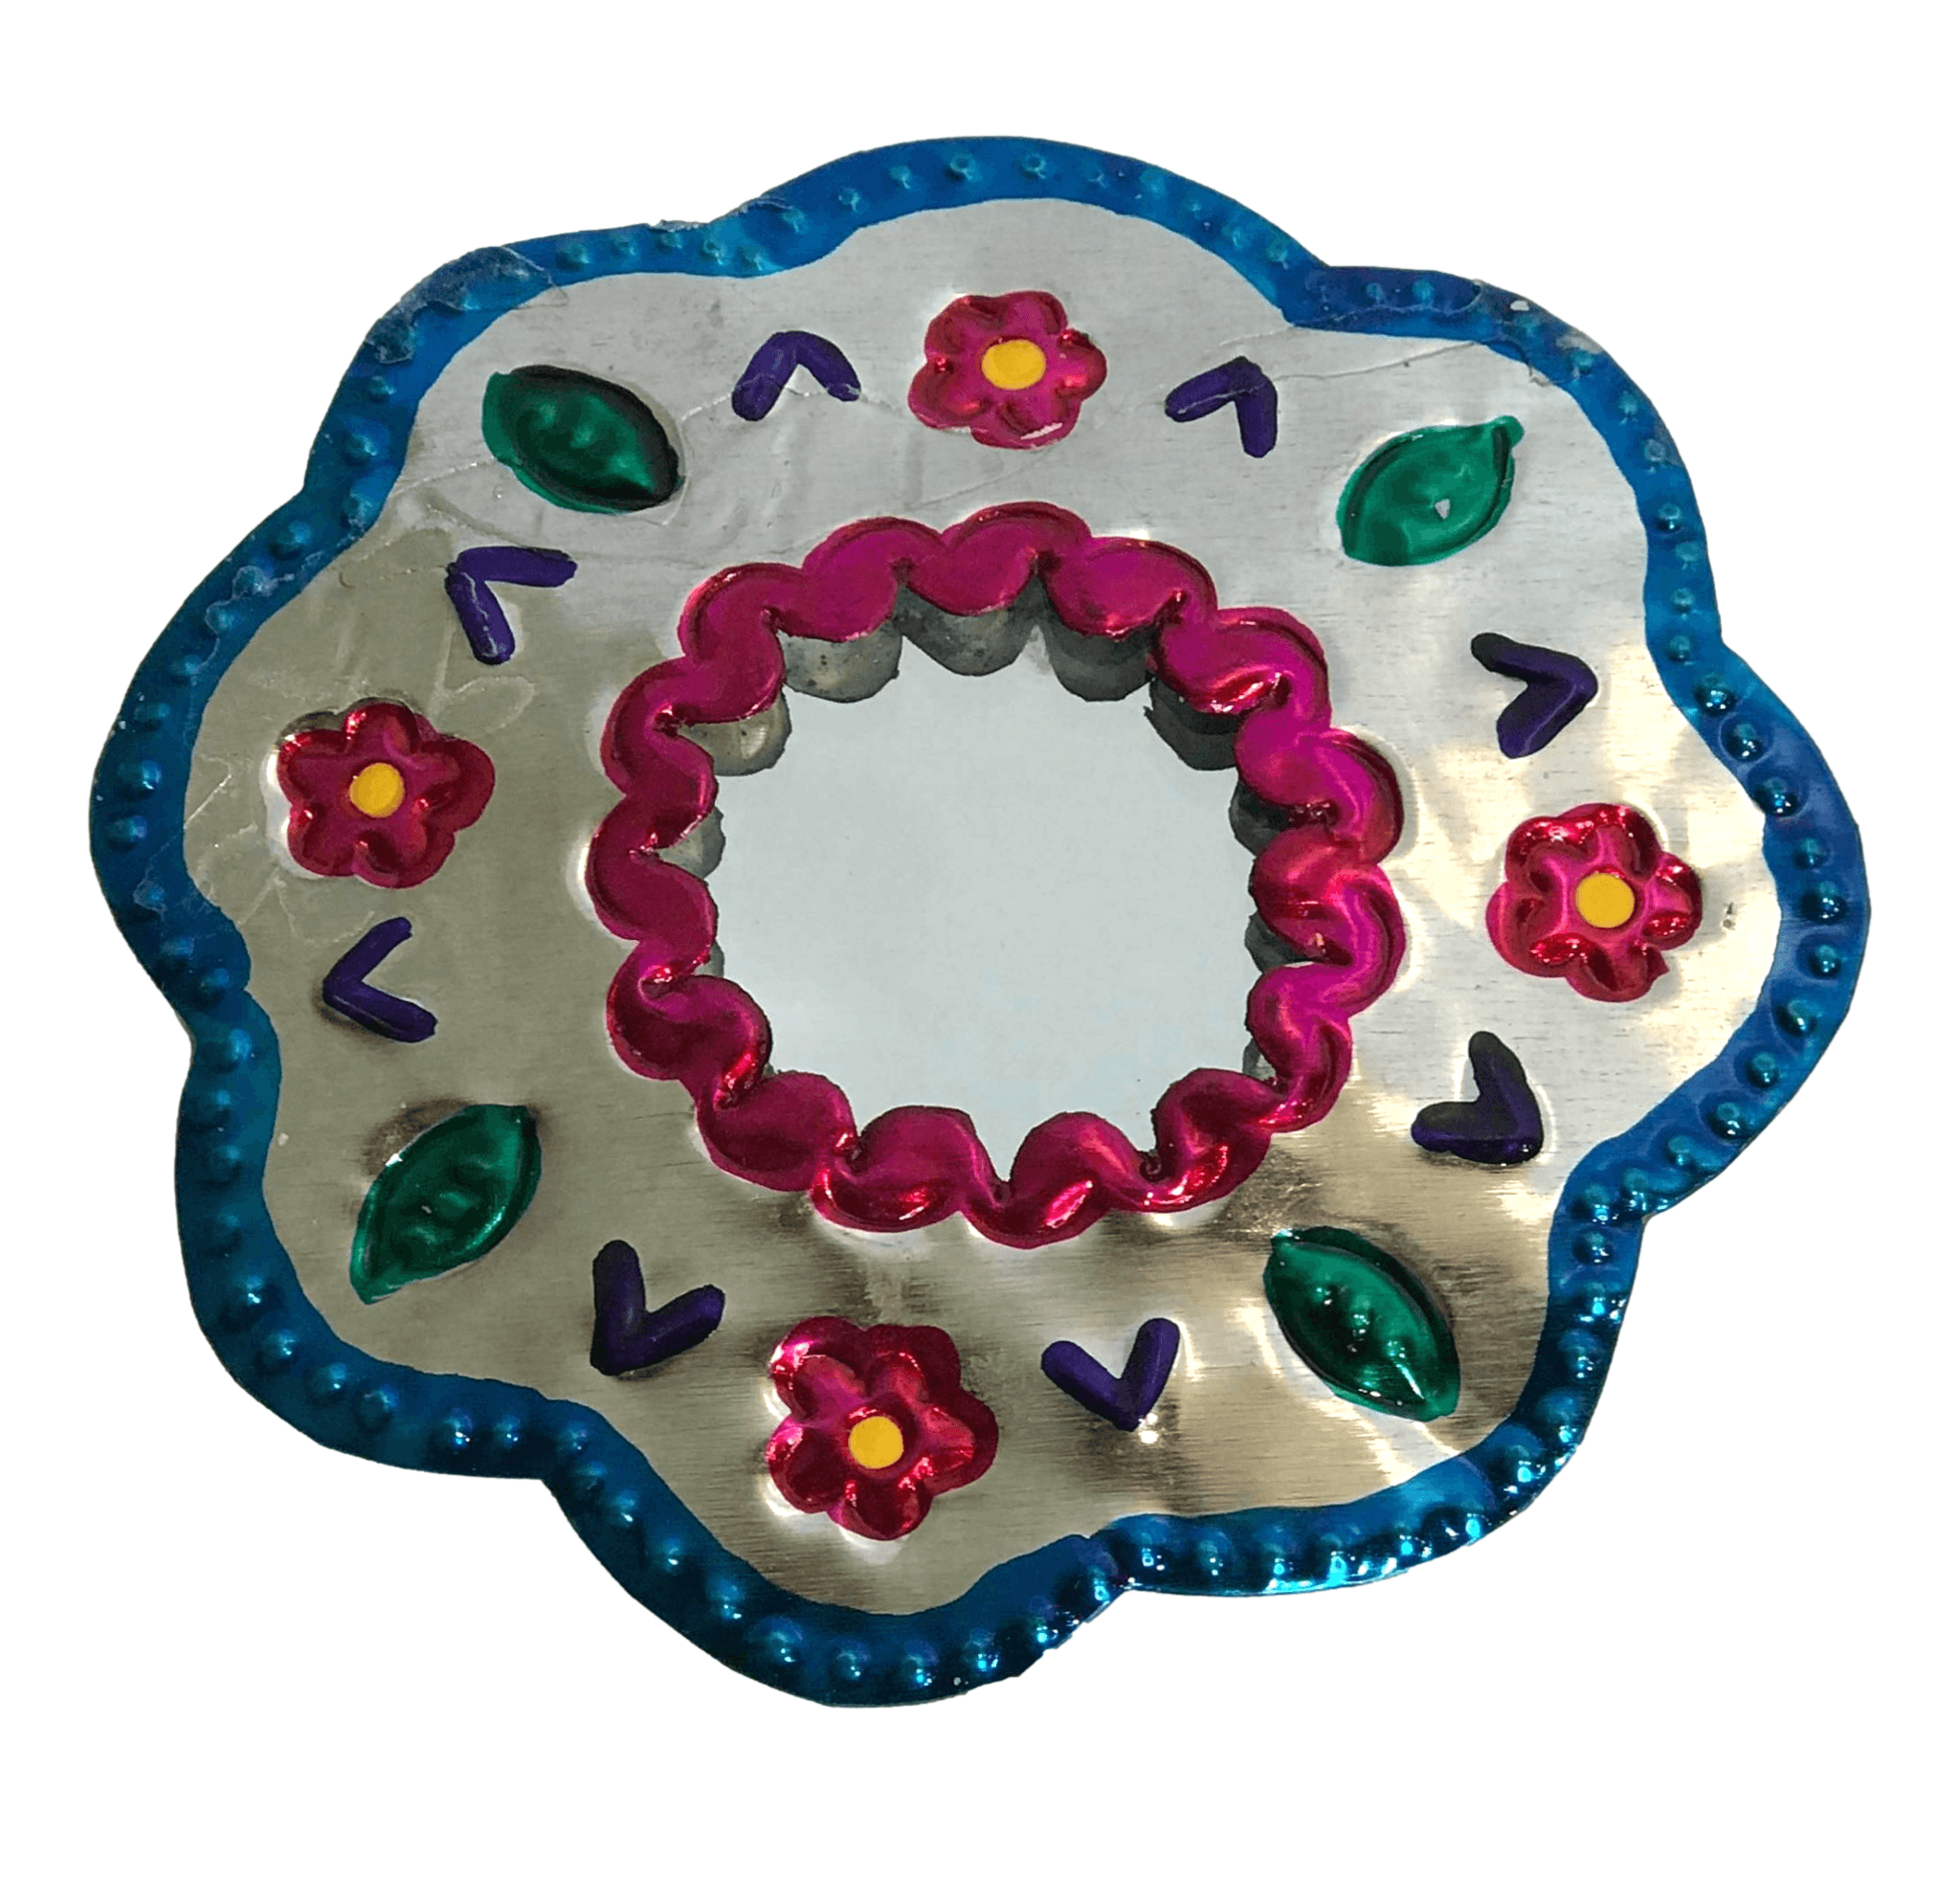 Mirror Flower Elaborate Tin Work Painted D: 4 inches - Ysleta Mission Gift Shop- VOTED 2022 El Paso's Best Gift Shop